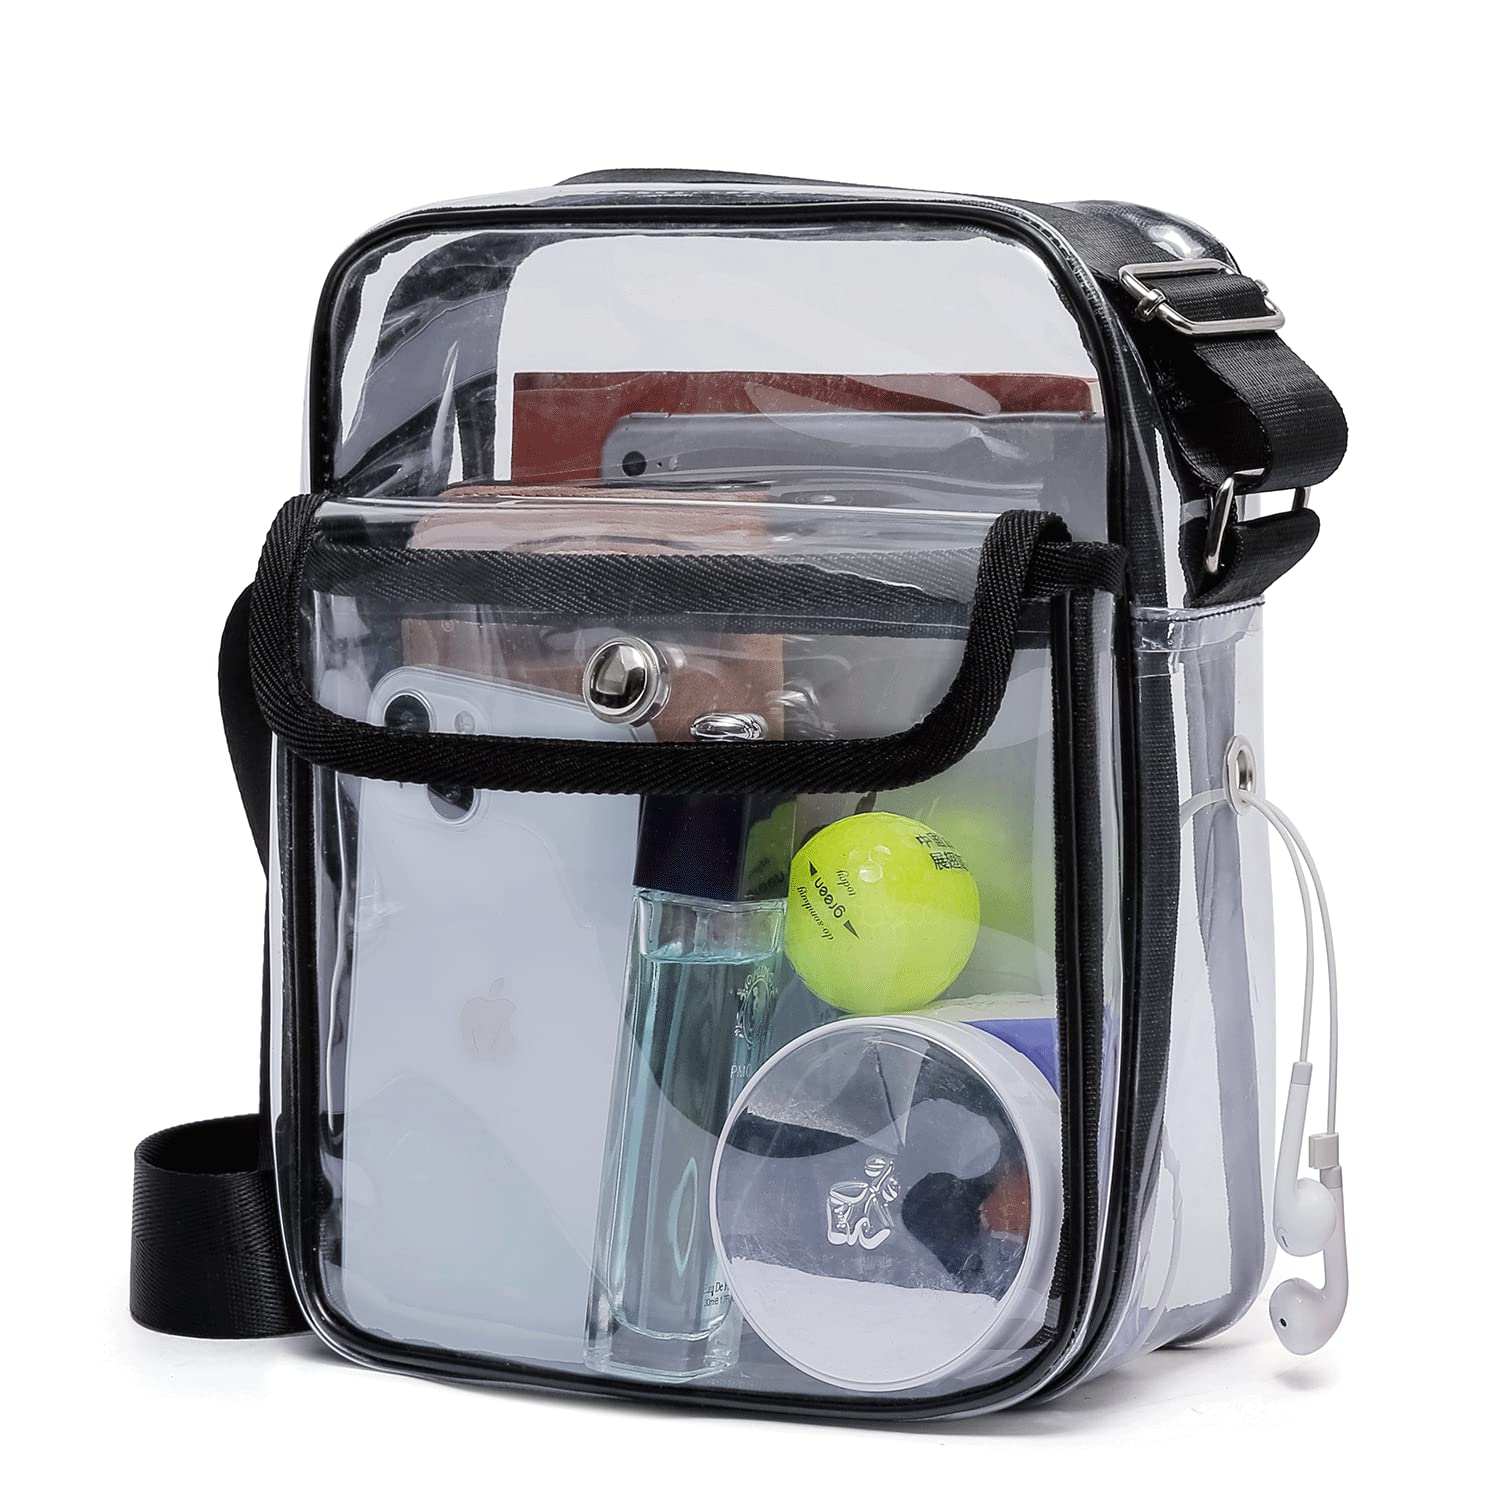 Clear Concert Bags and Clear Bag Policy –